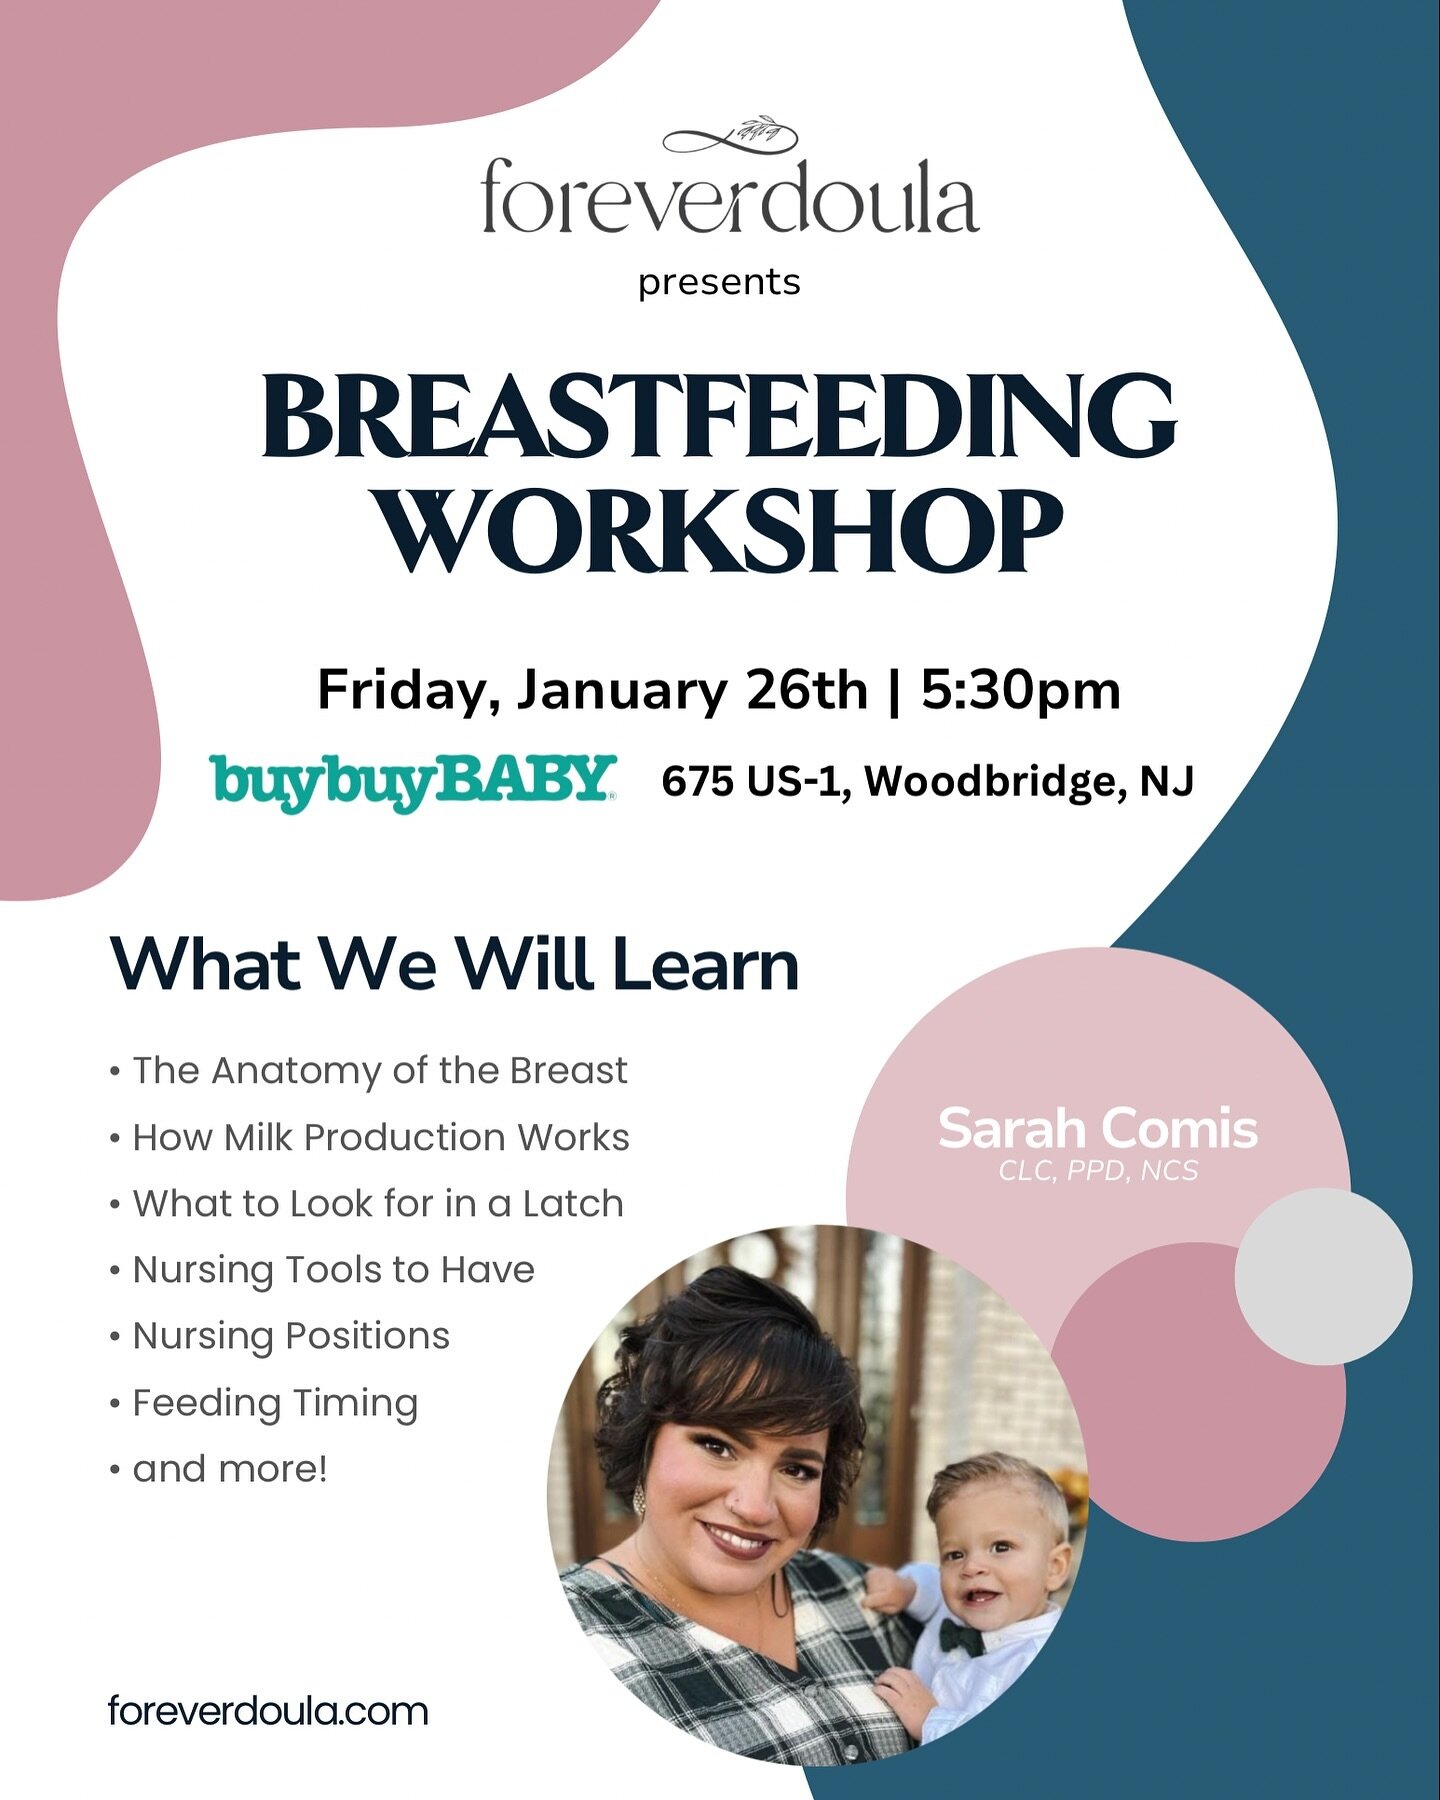 Excited to be partnering with @buybuybaby to provide a free breastfeeding workshop at their Woodbridge, NJ location! Be sure to join me at 5:30pm this Friday, January 26th for some helpful tips and tricks.
.
.
.
#breastfeeding #doulalife #postpartumj